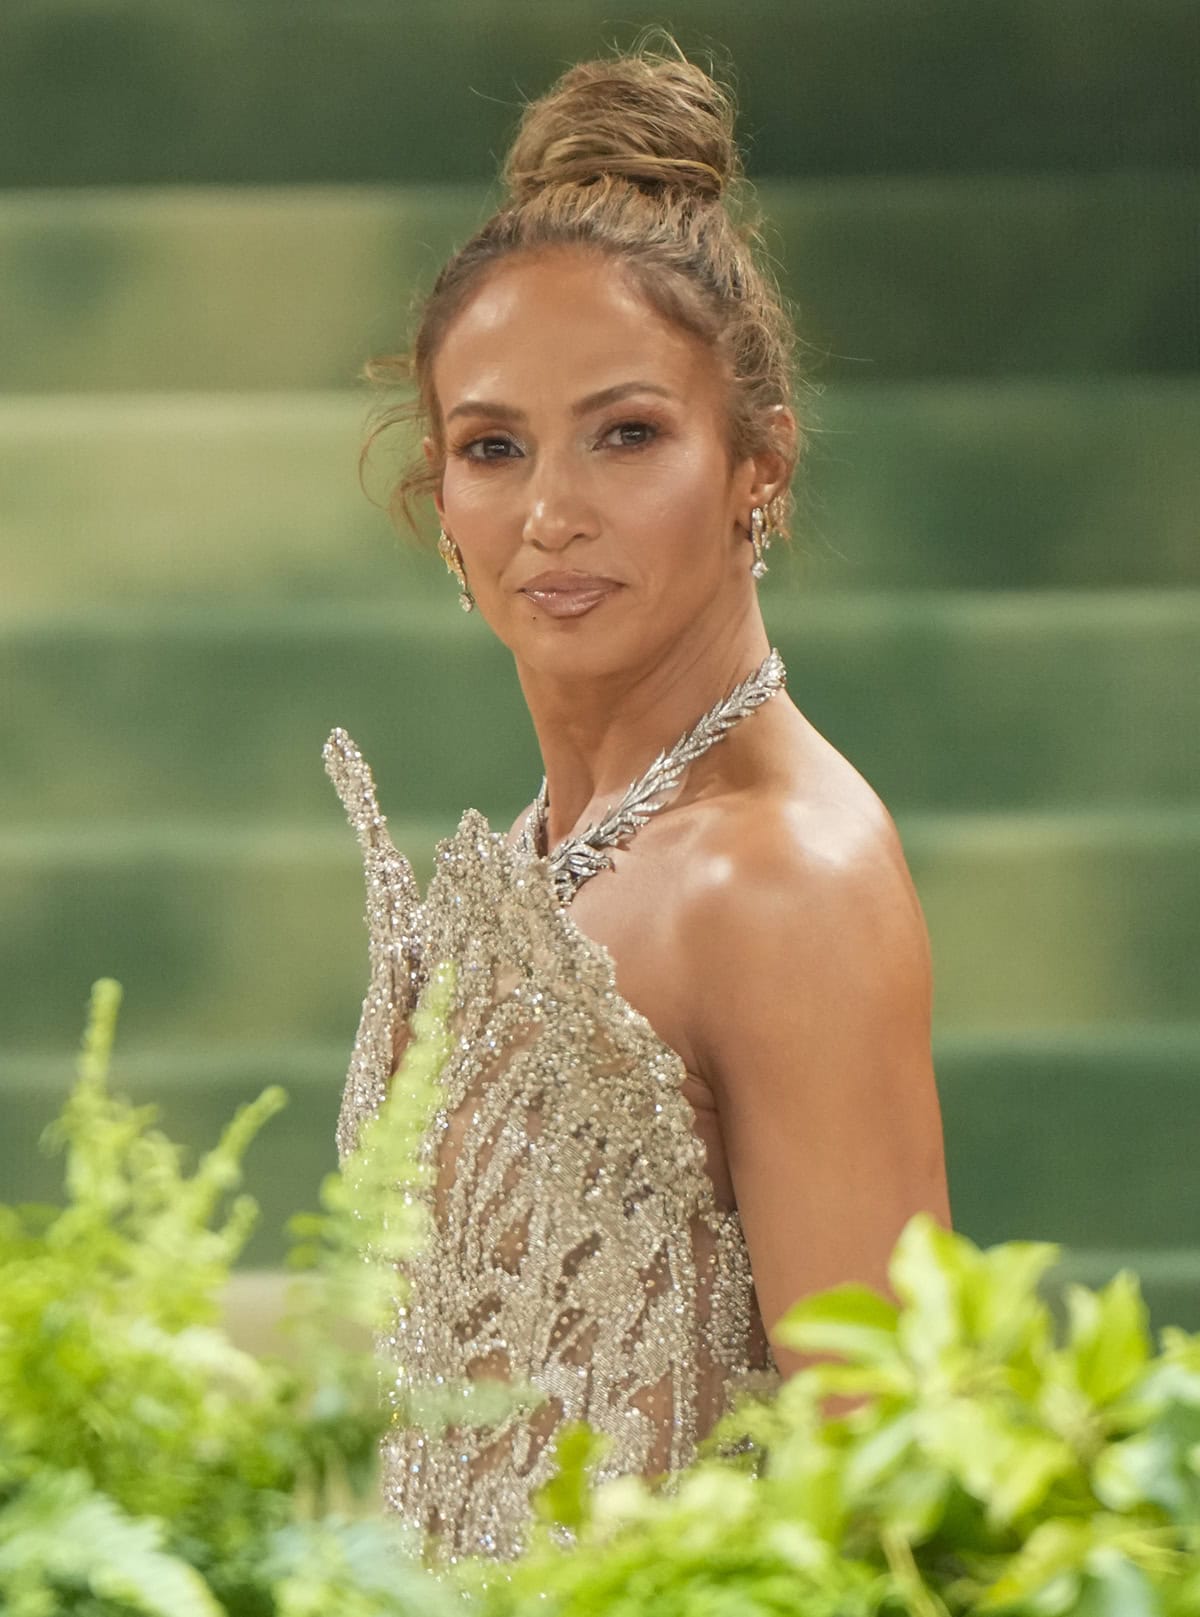 Jennifer Lopez completes her butterfly-themed look with butterfly-inspired glam, wearing a textured top knot and bronzed makeup